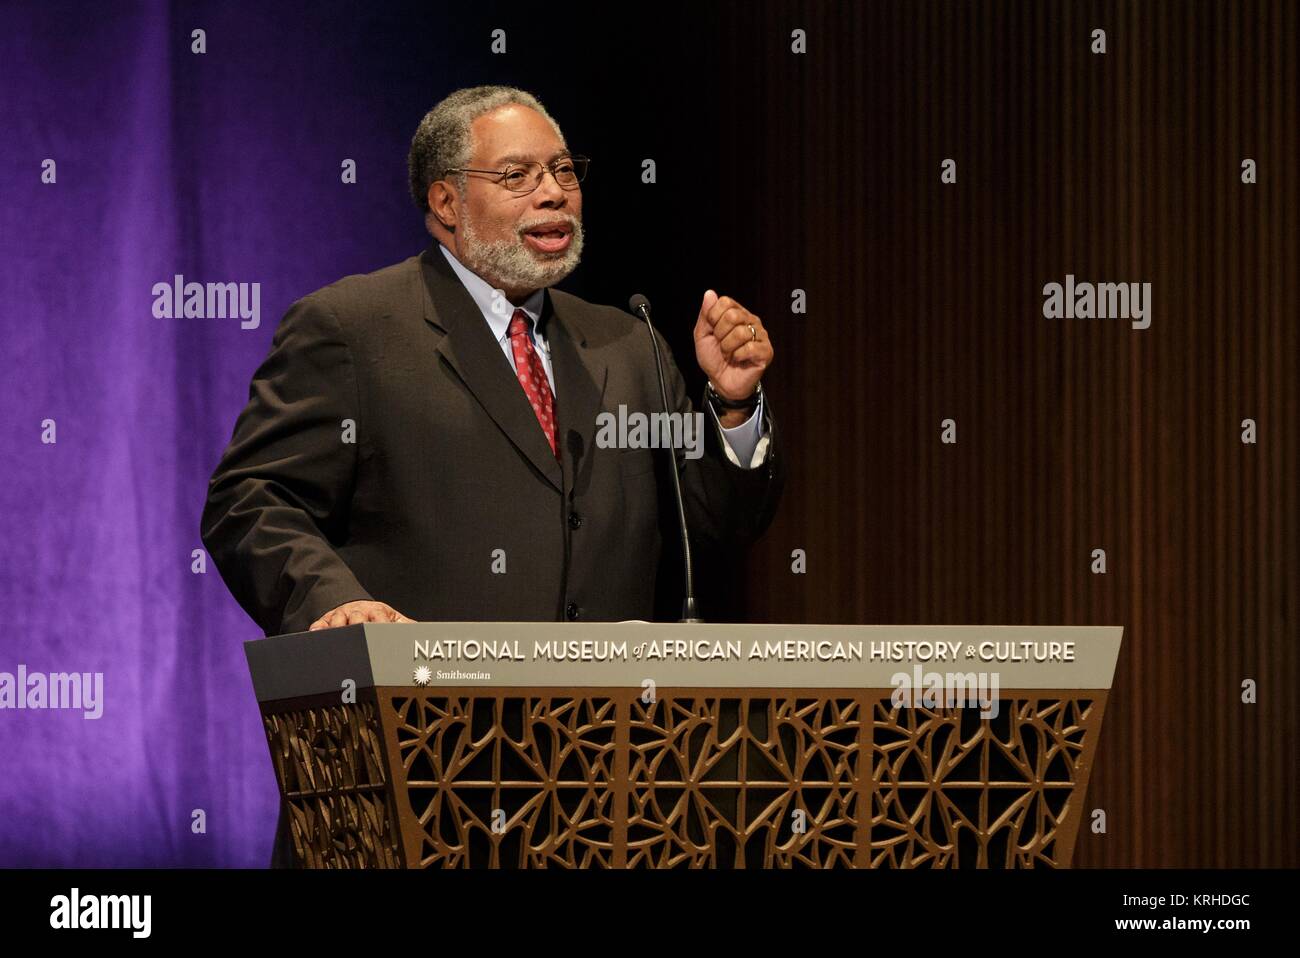 Smithsonian National Museum of African American History and Culture Founding Director Lonnie G. Bunch III speaks before a screening of the film Hidden Figures at the Smithsonian National Museum of African American History and Culture December 14, 2016 in Washington, DC. The film is based on the lives of three African-American mathematicians who worked for NASA during the John Glenn Friendship 7 mission in 1962. Stock Photo